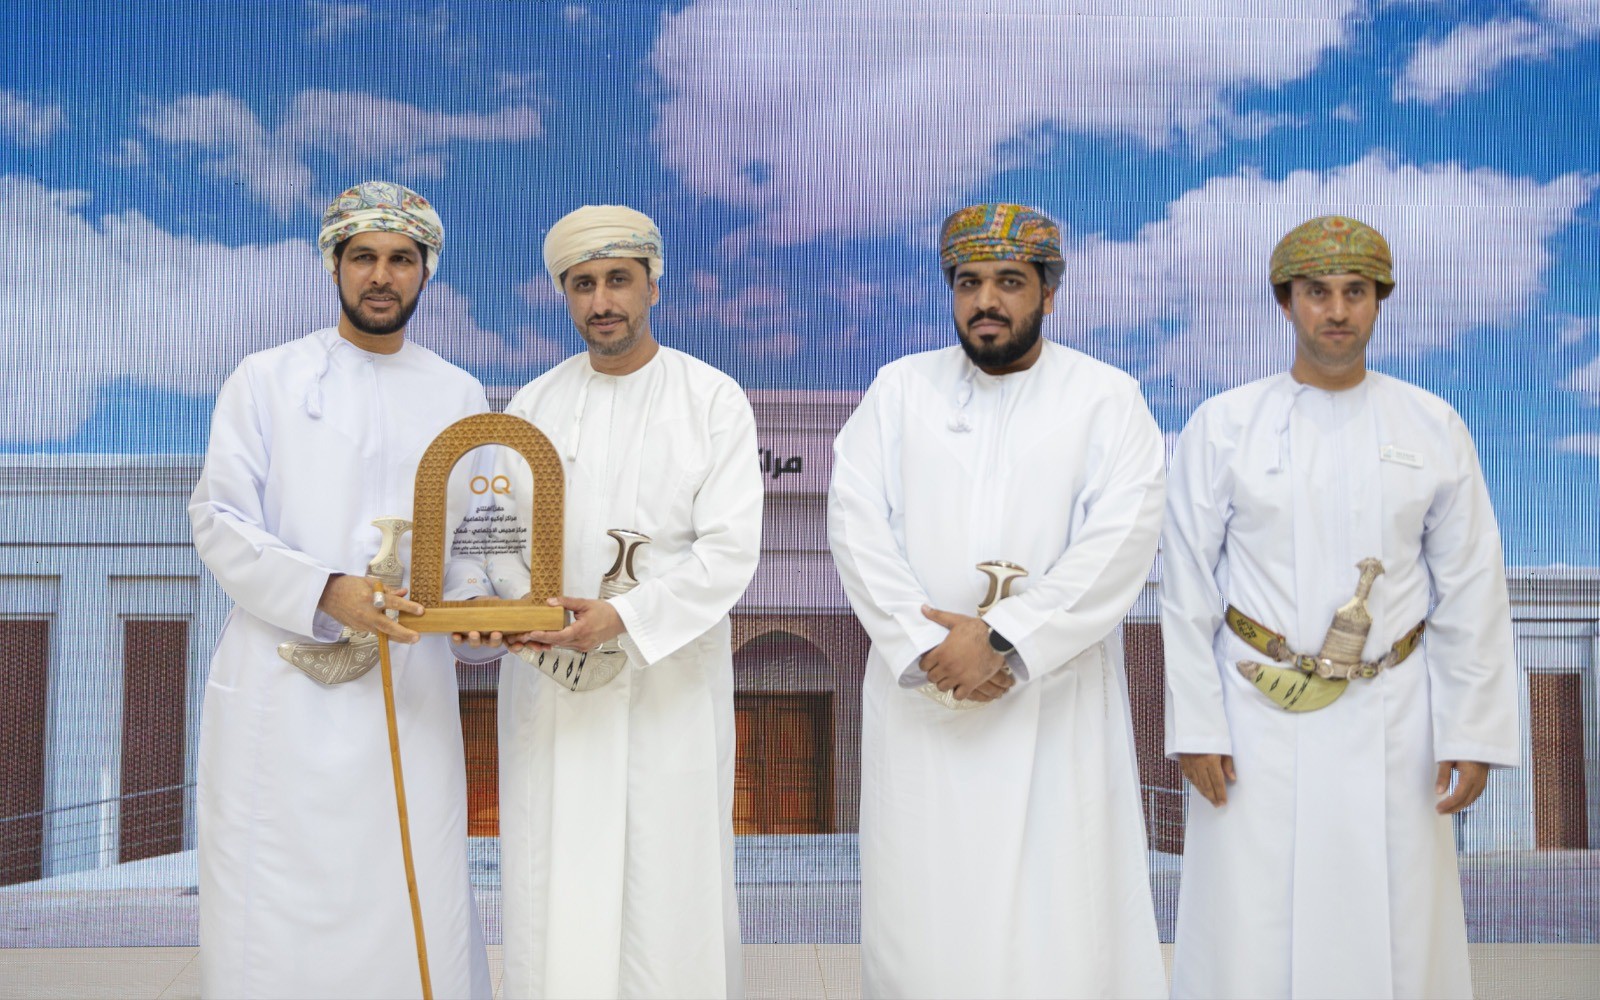 Jusoor Celebrates the Launch of OQ's Social Community Centers